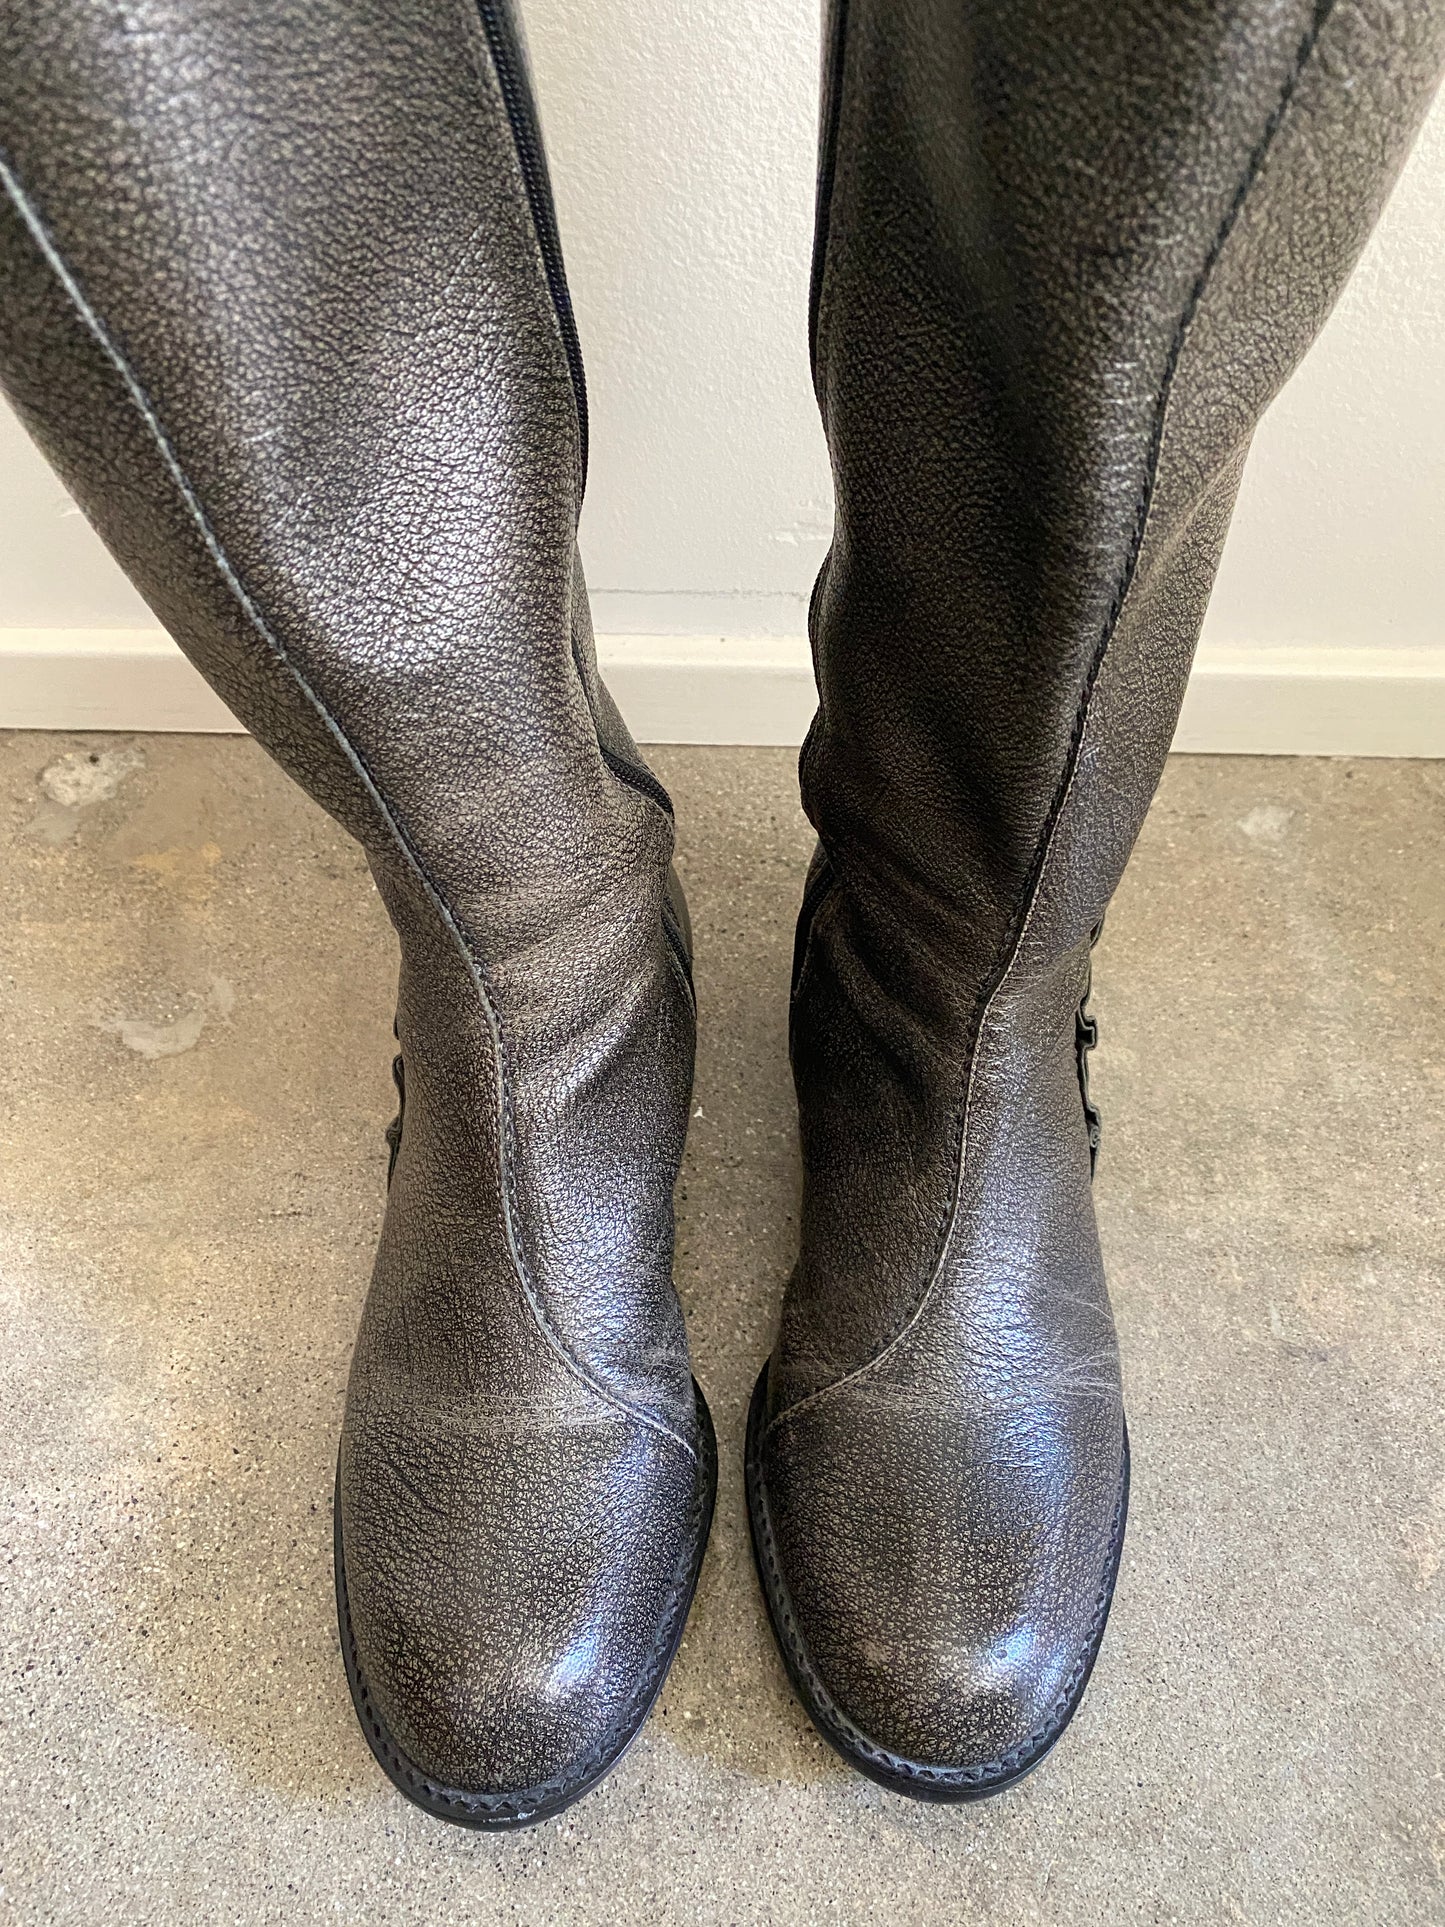 00's Ruffle Riding Boots